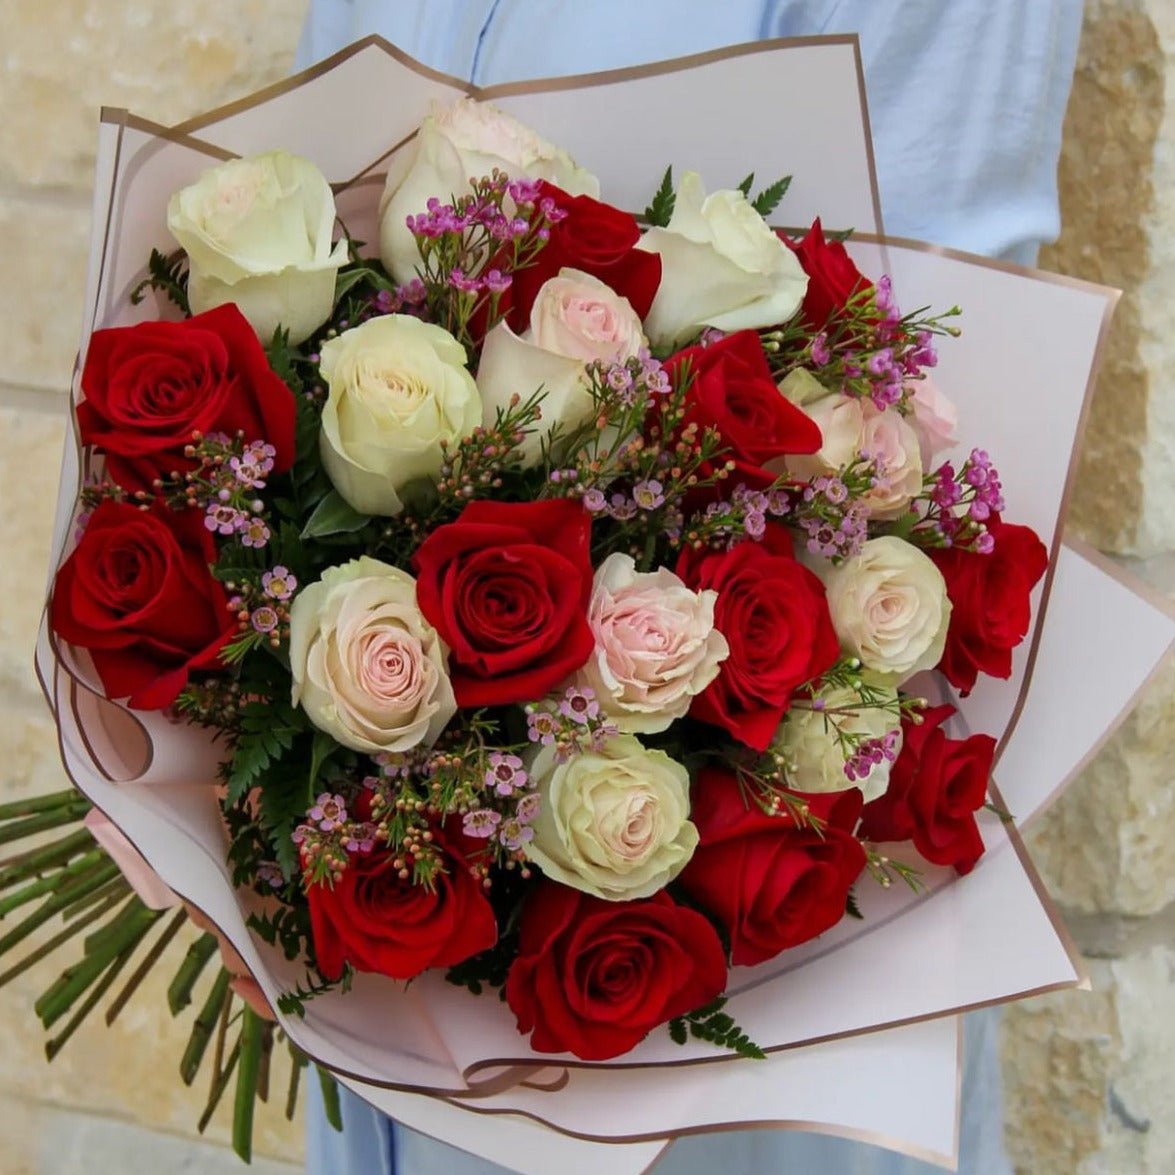 Large Bouquet of White and red roses.